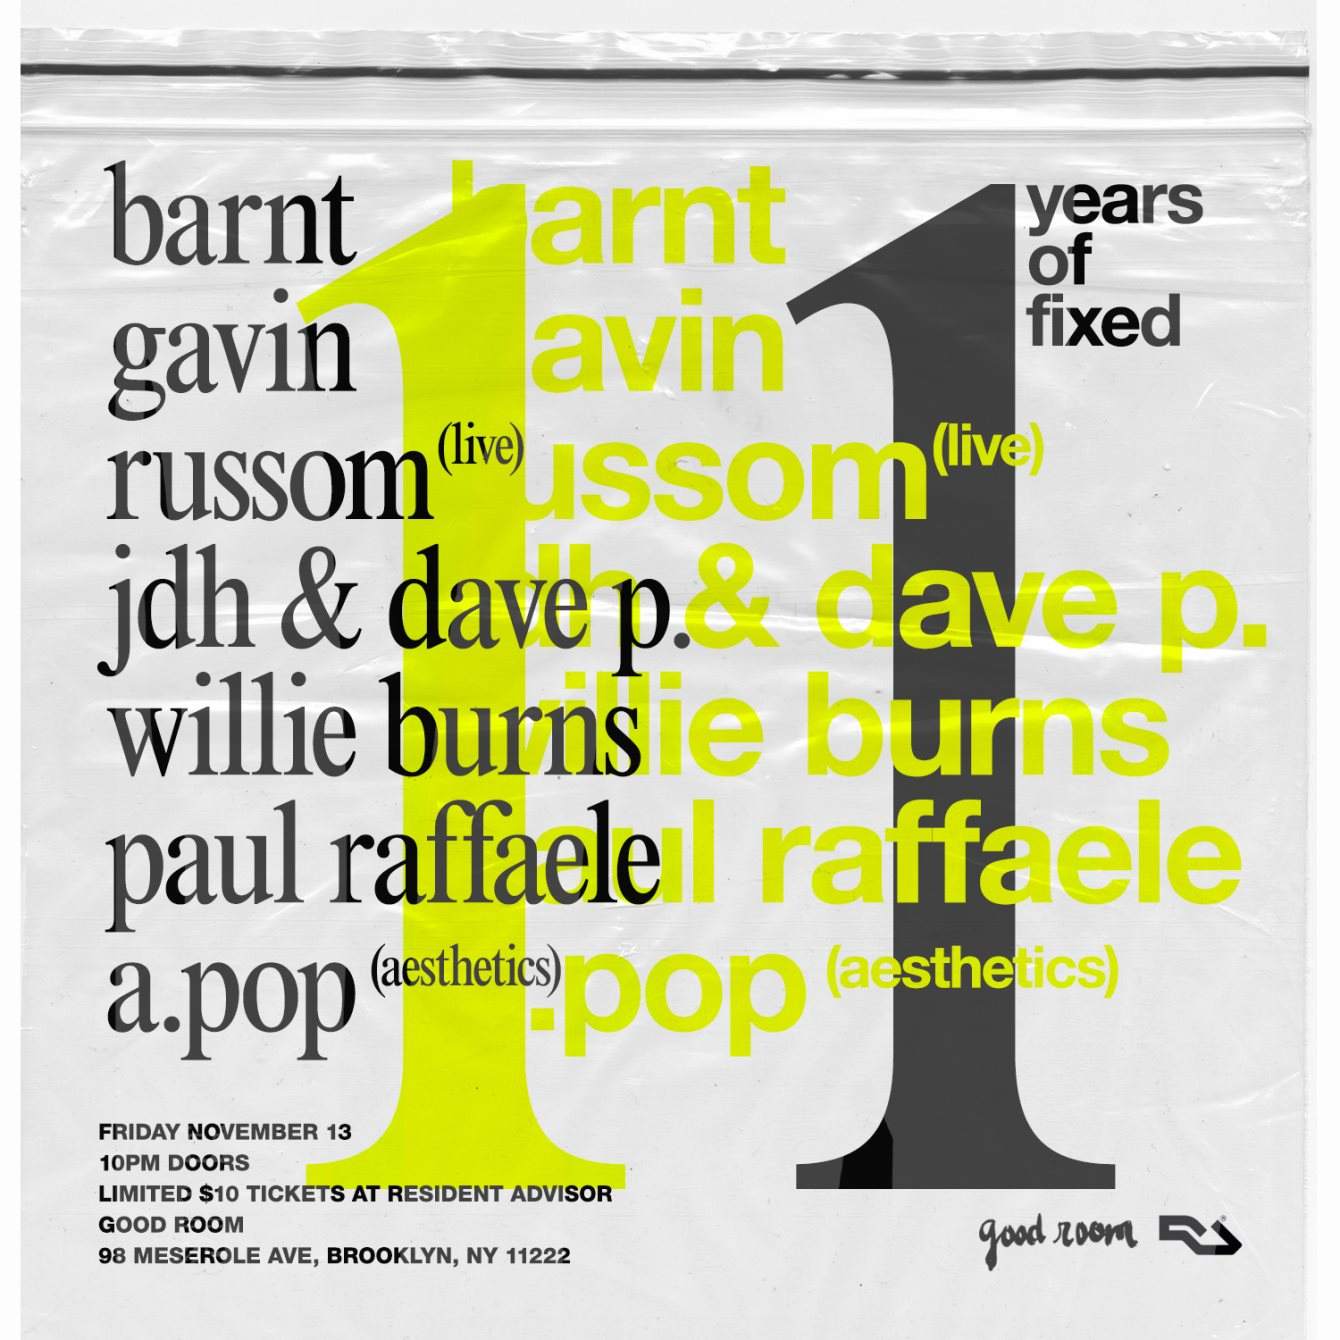 Fixed 11th Anniversary with Barnt, Gavin Russom (Live), Willie Burns & More - Página frontal